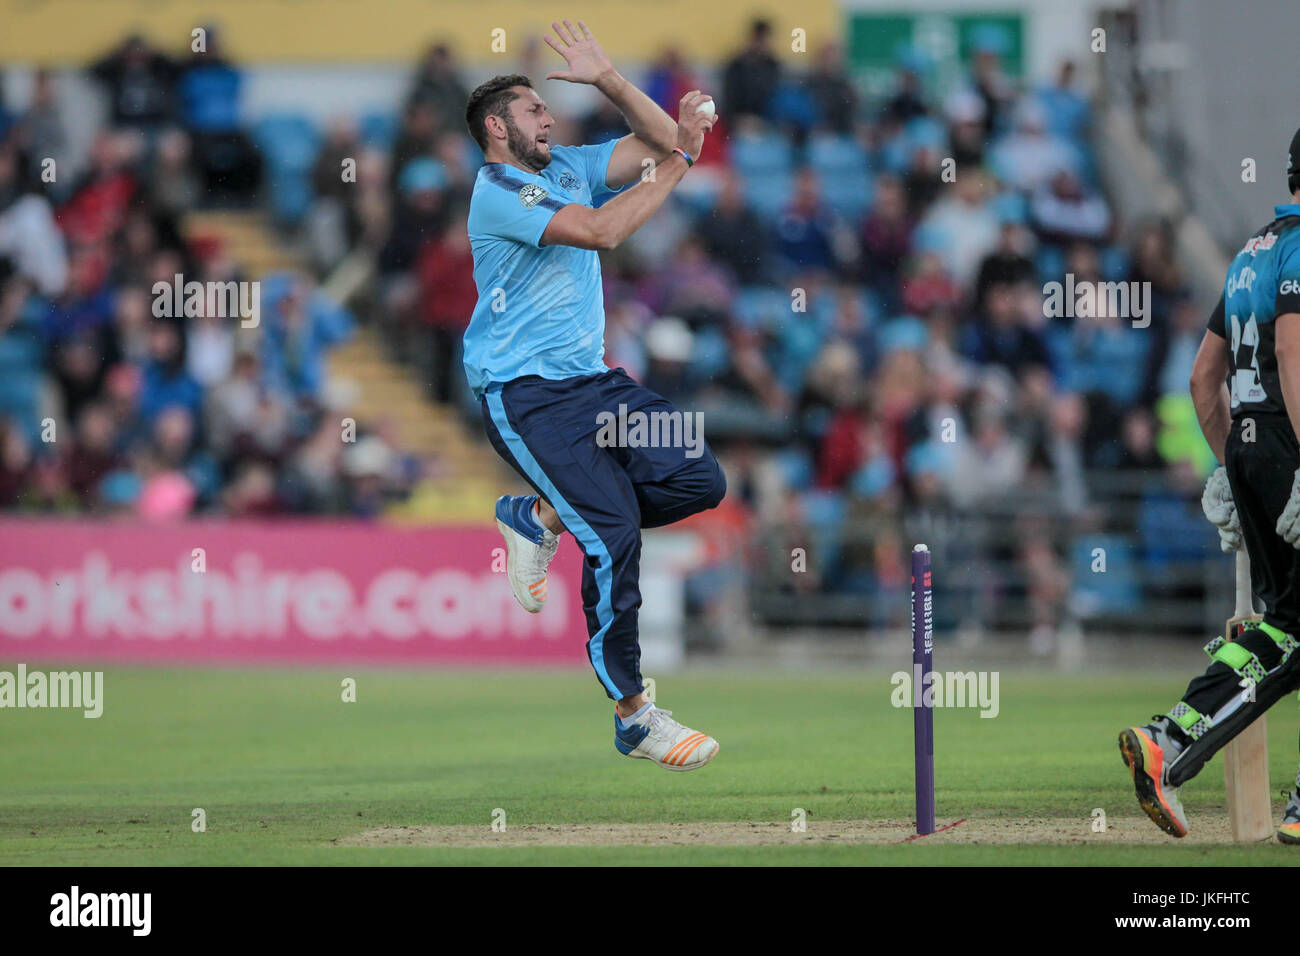 Headingley, UK. 23rd July, 2017. Tim Bresnan (Yorkshire CCC) in the air as he bowls during the Natwest T20 Blast game between Yorkshire Vikings v Worcestershire Rapids on Sunday 23 July 2017. Photo by Mark P Doherty. Credit: Caught Light Photography Limited/Alamy Live News Stock Photo